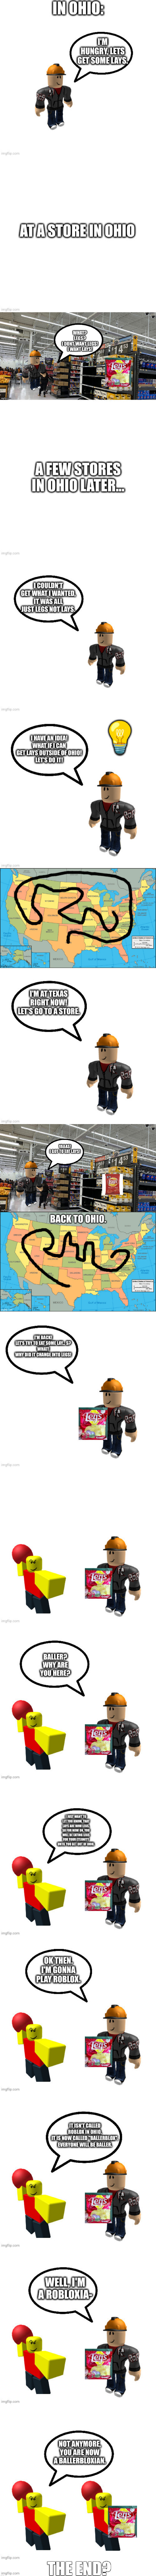 This what happens when you go to ohio. Can anyone relate to this? | made w/ Imgflip meme maker